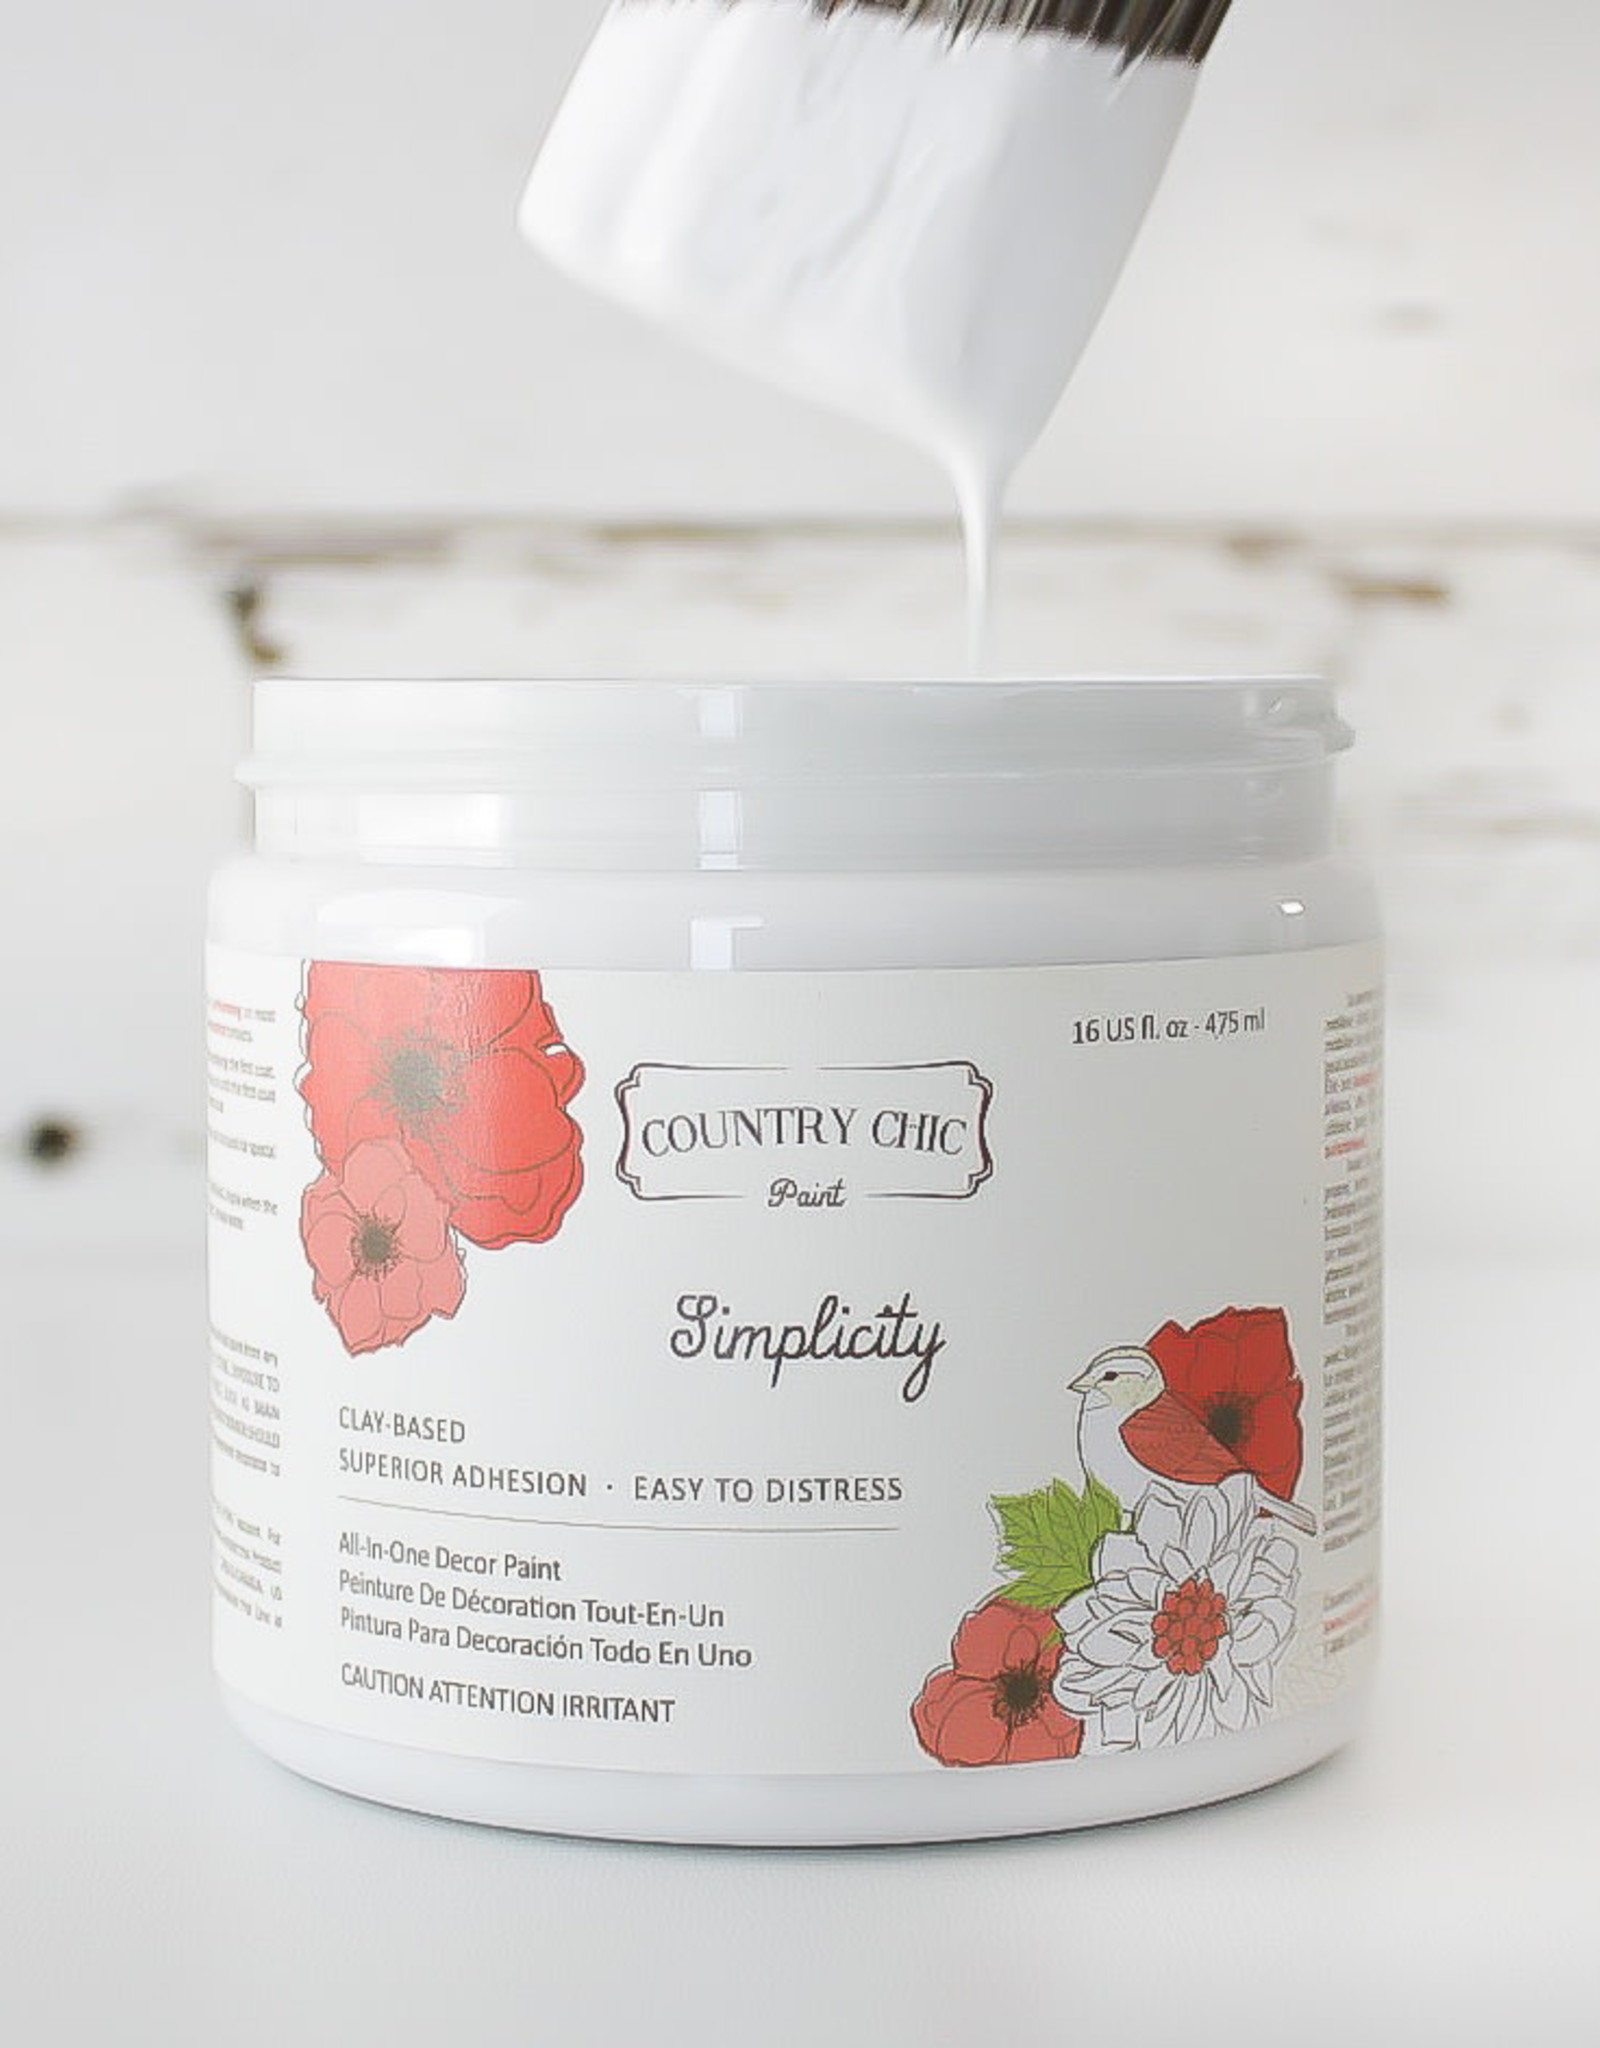 Country Chic Country Chic Paint Quart - 32oz Simplicity